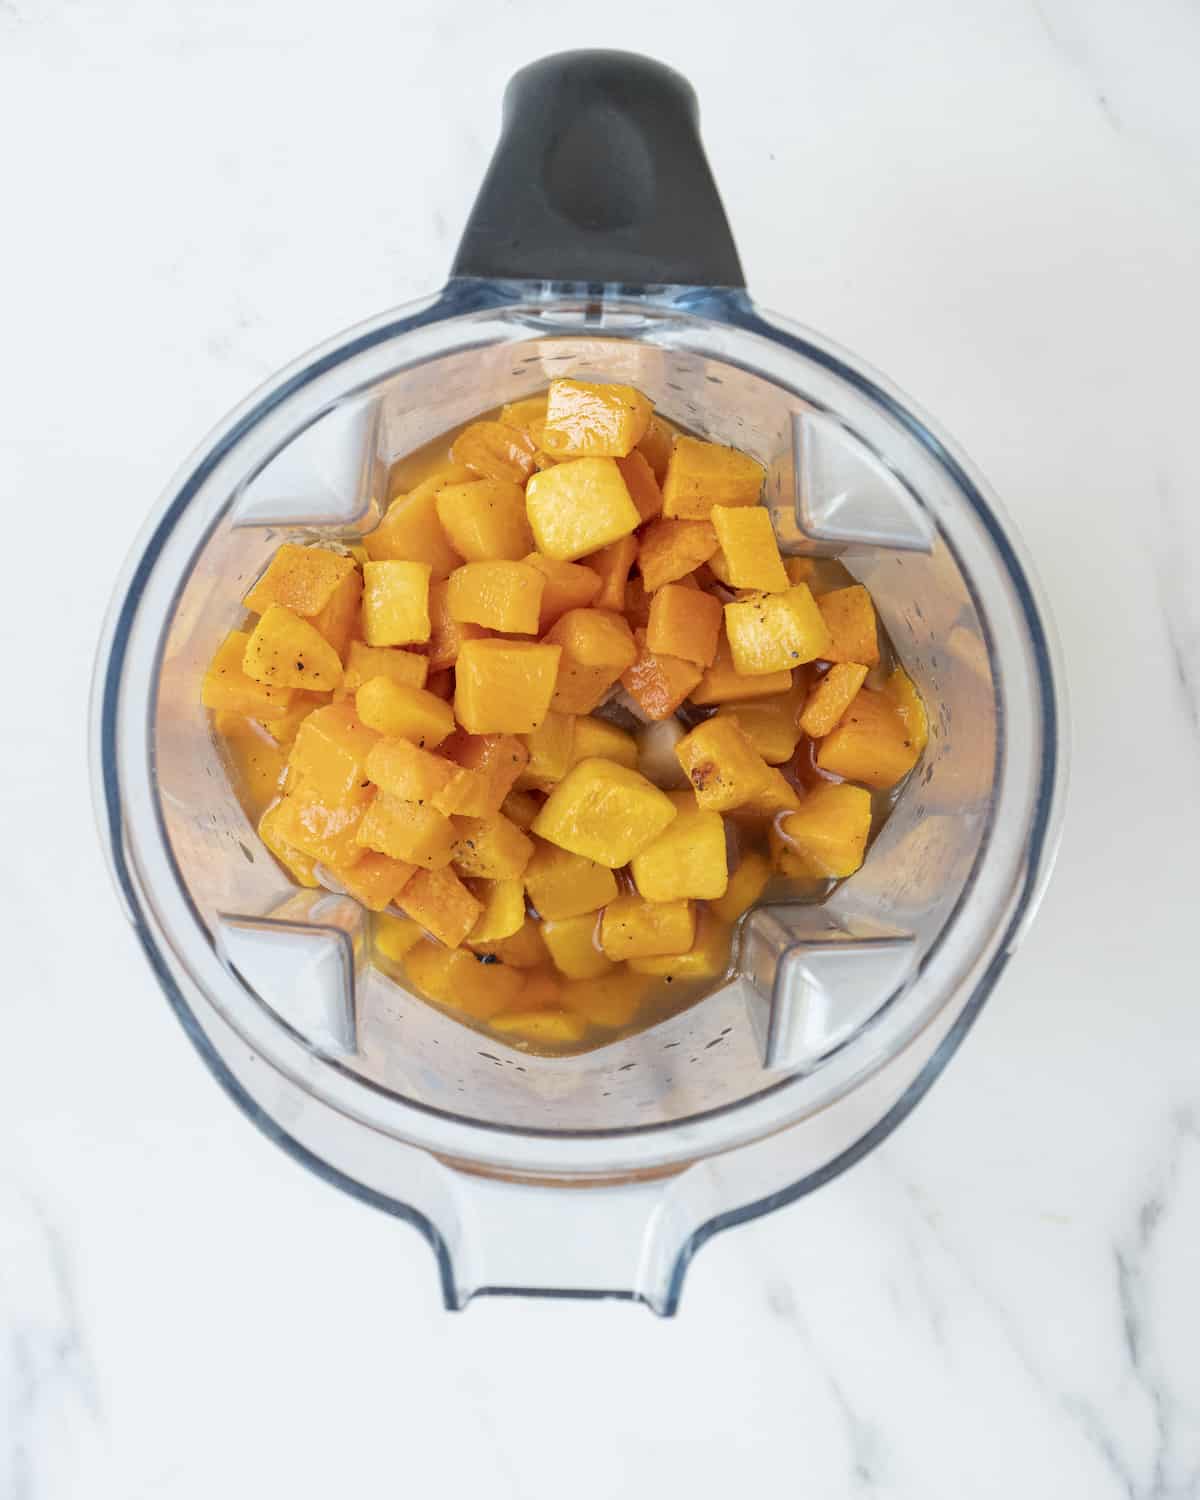 Baked squash that has been cubed sitting inside a blender.  